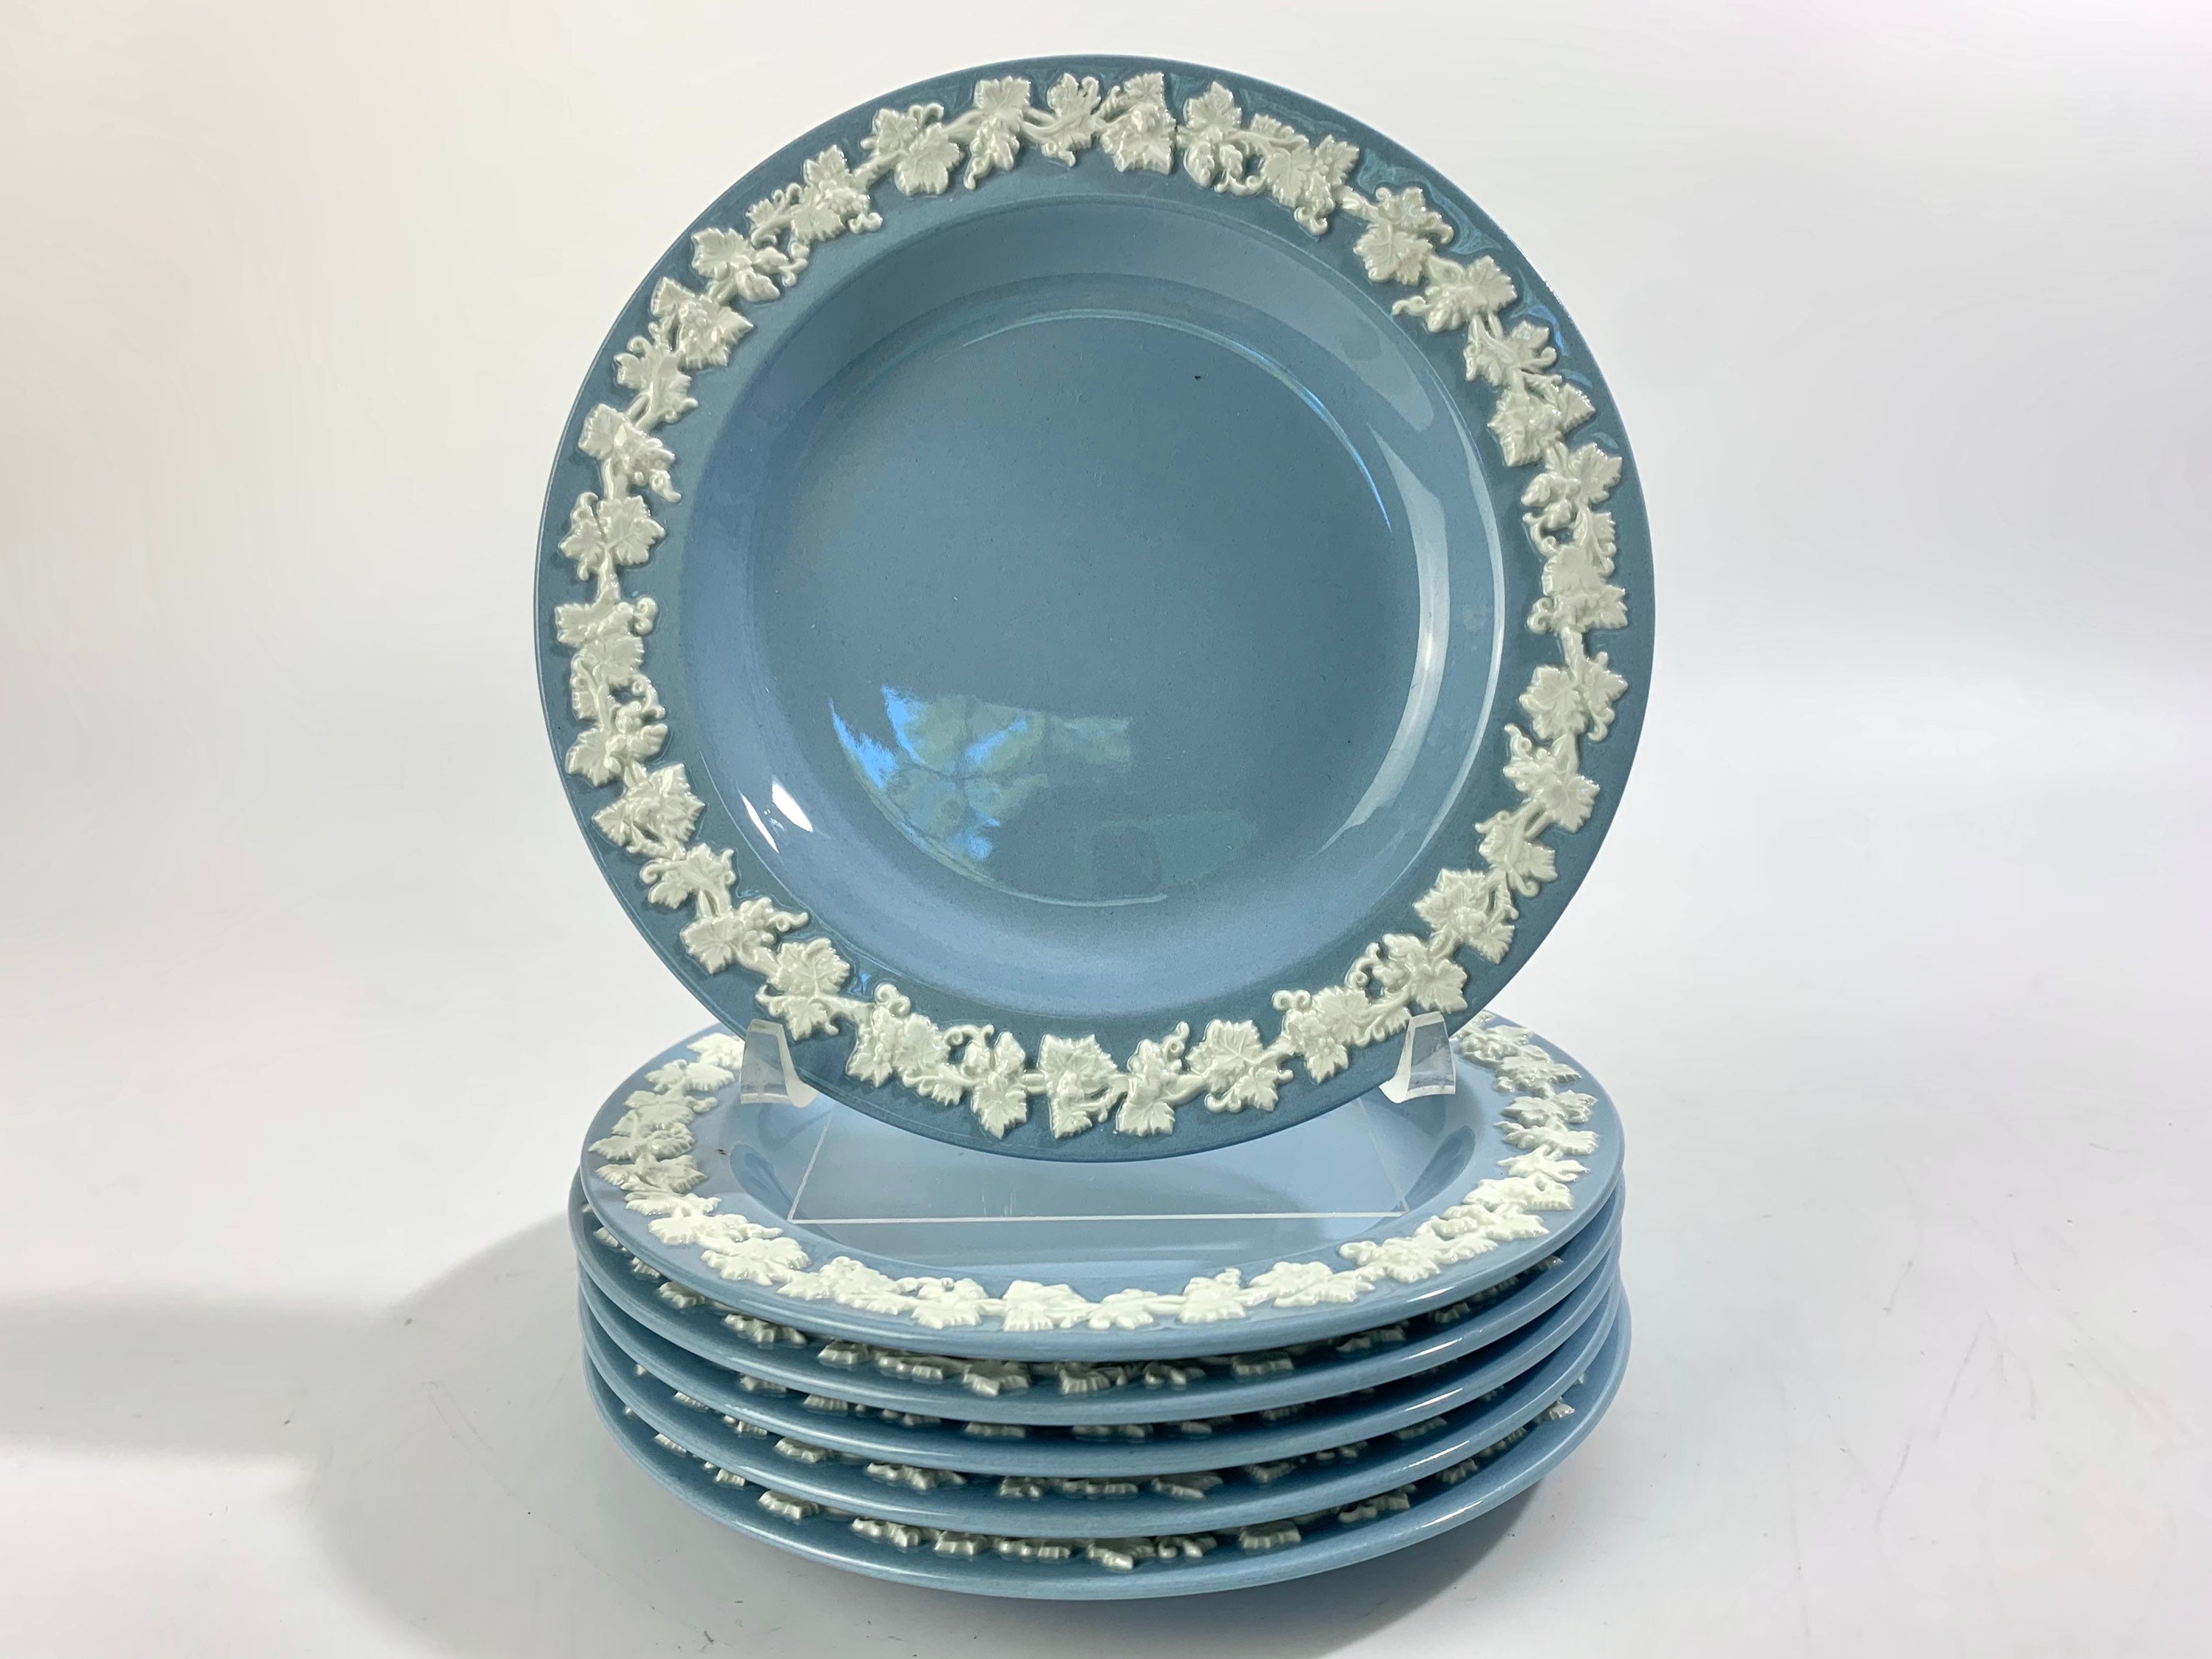 Simply Elegant Blue and White Dessert Plates - set of 4 – The Twiggery